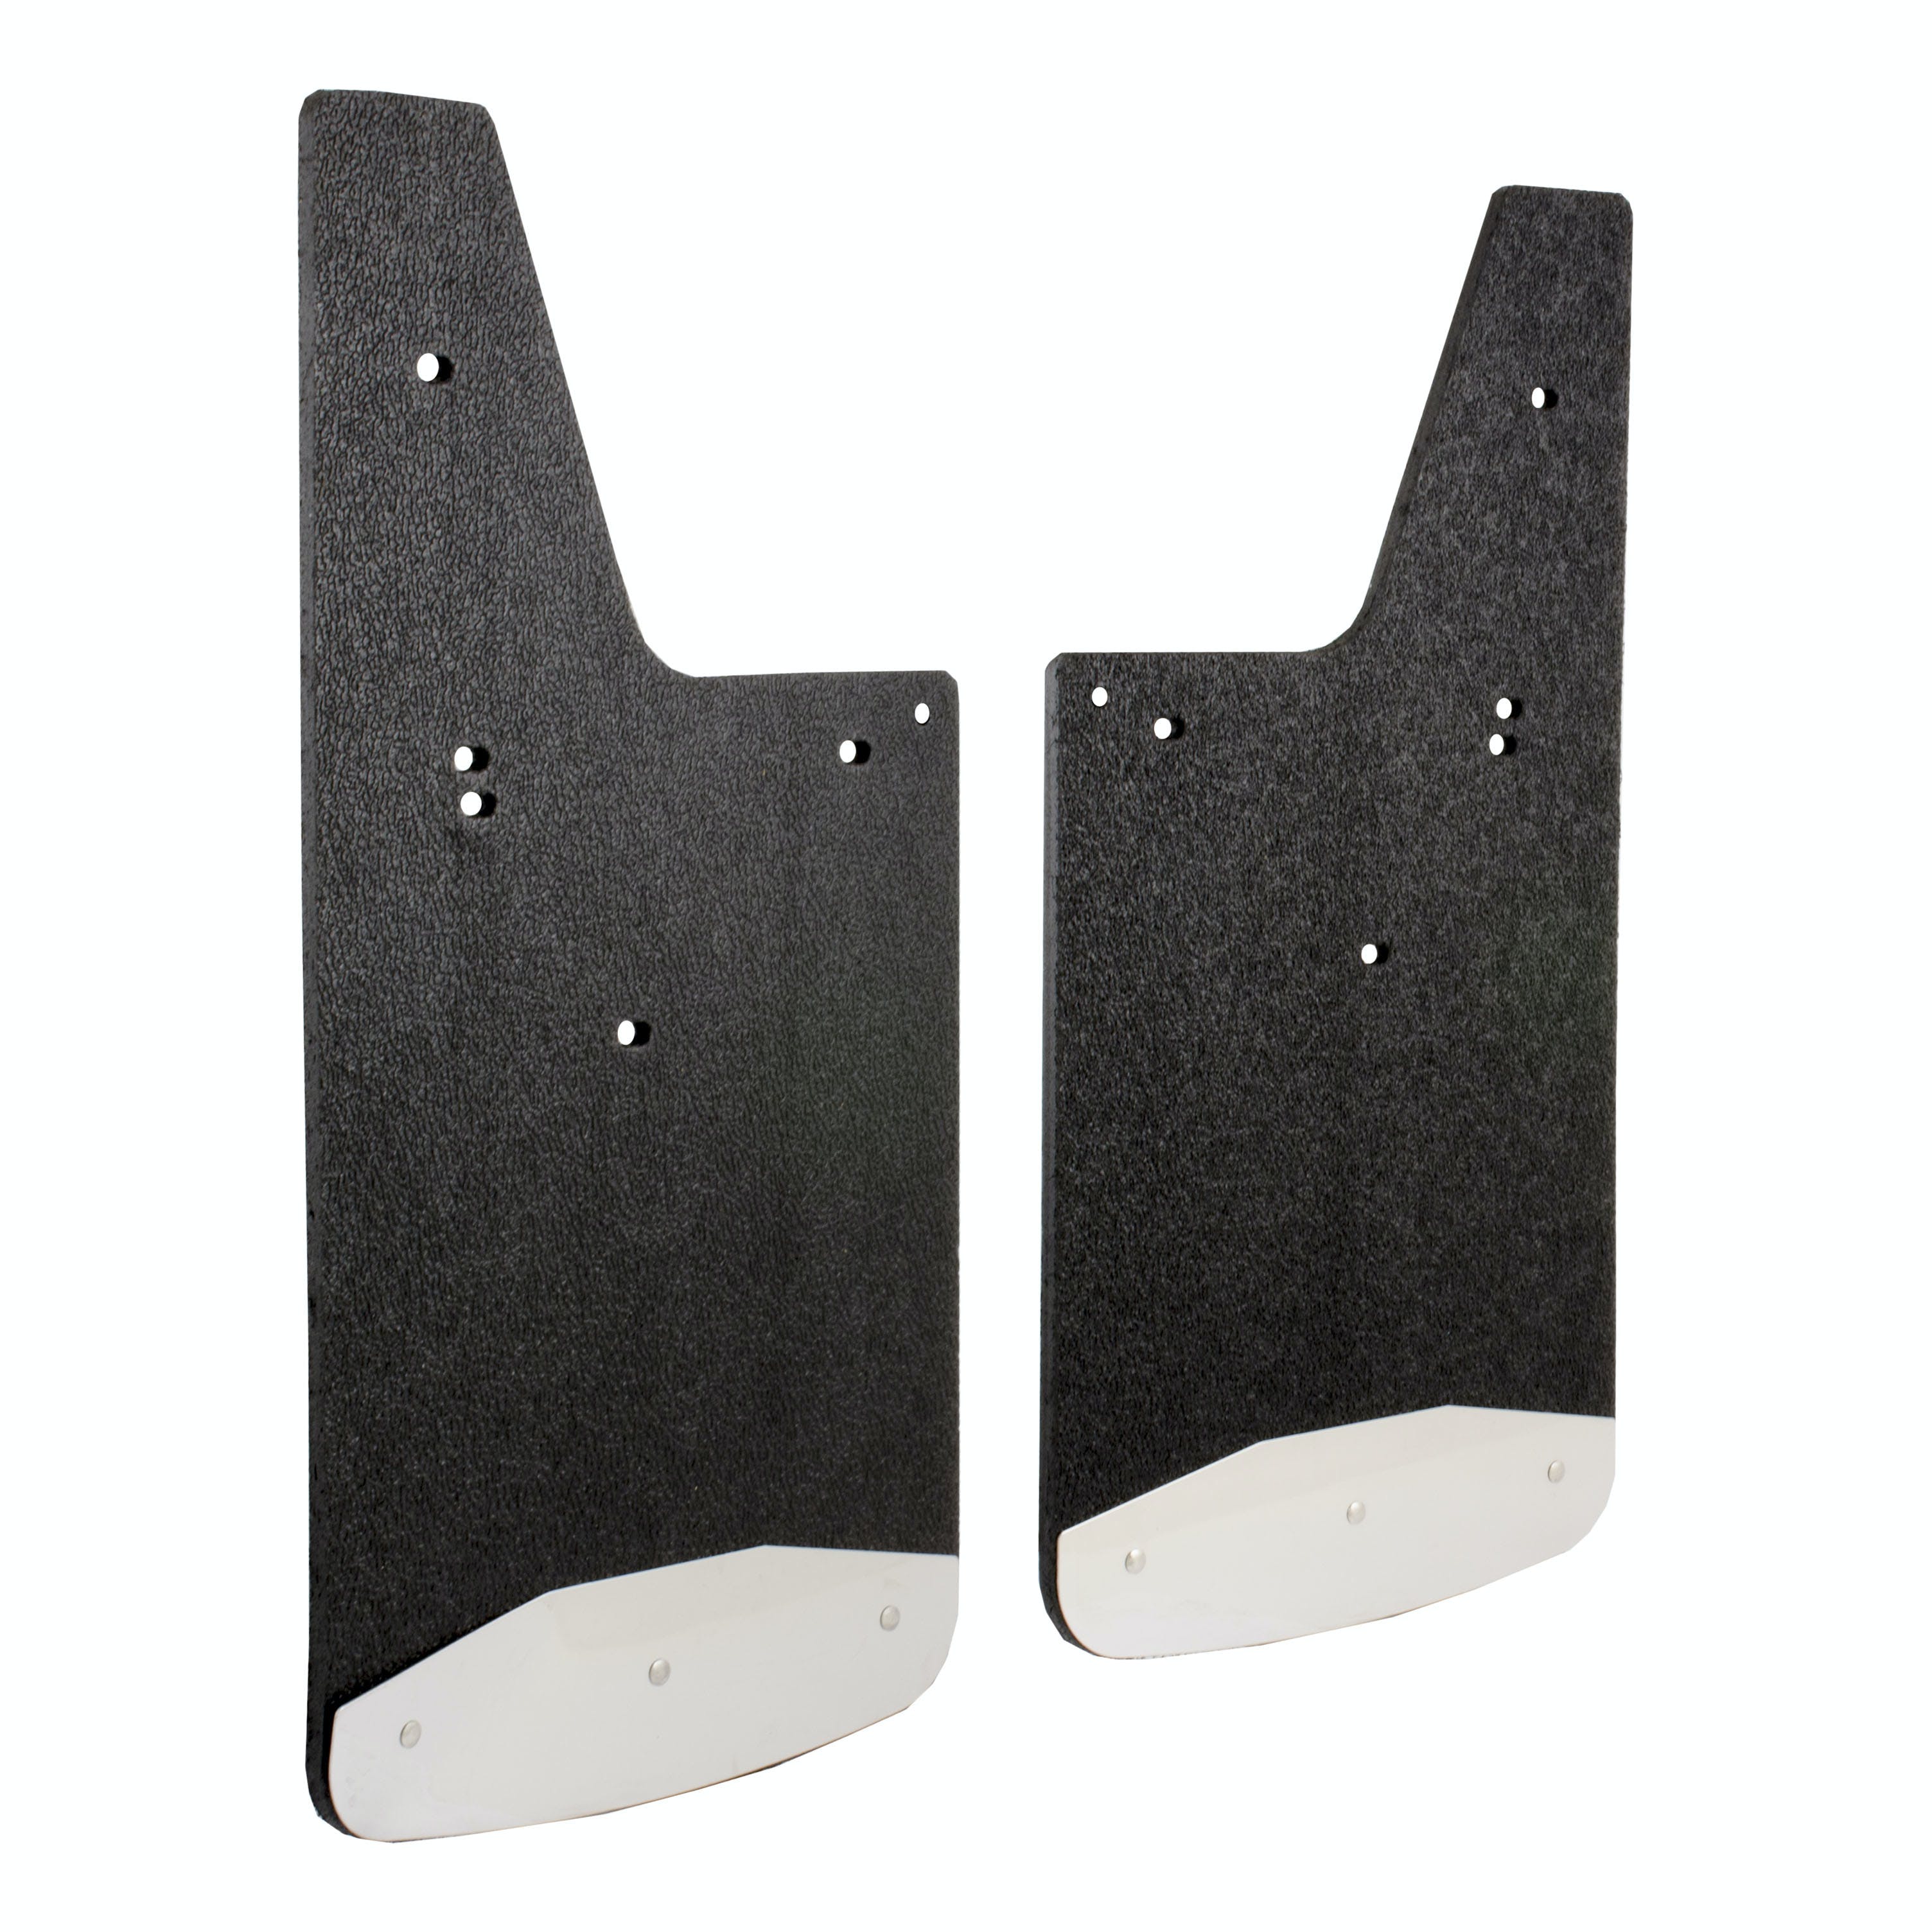 LUVERNE 251663 Textured Rubber Mud Guards